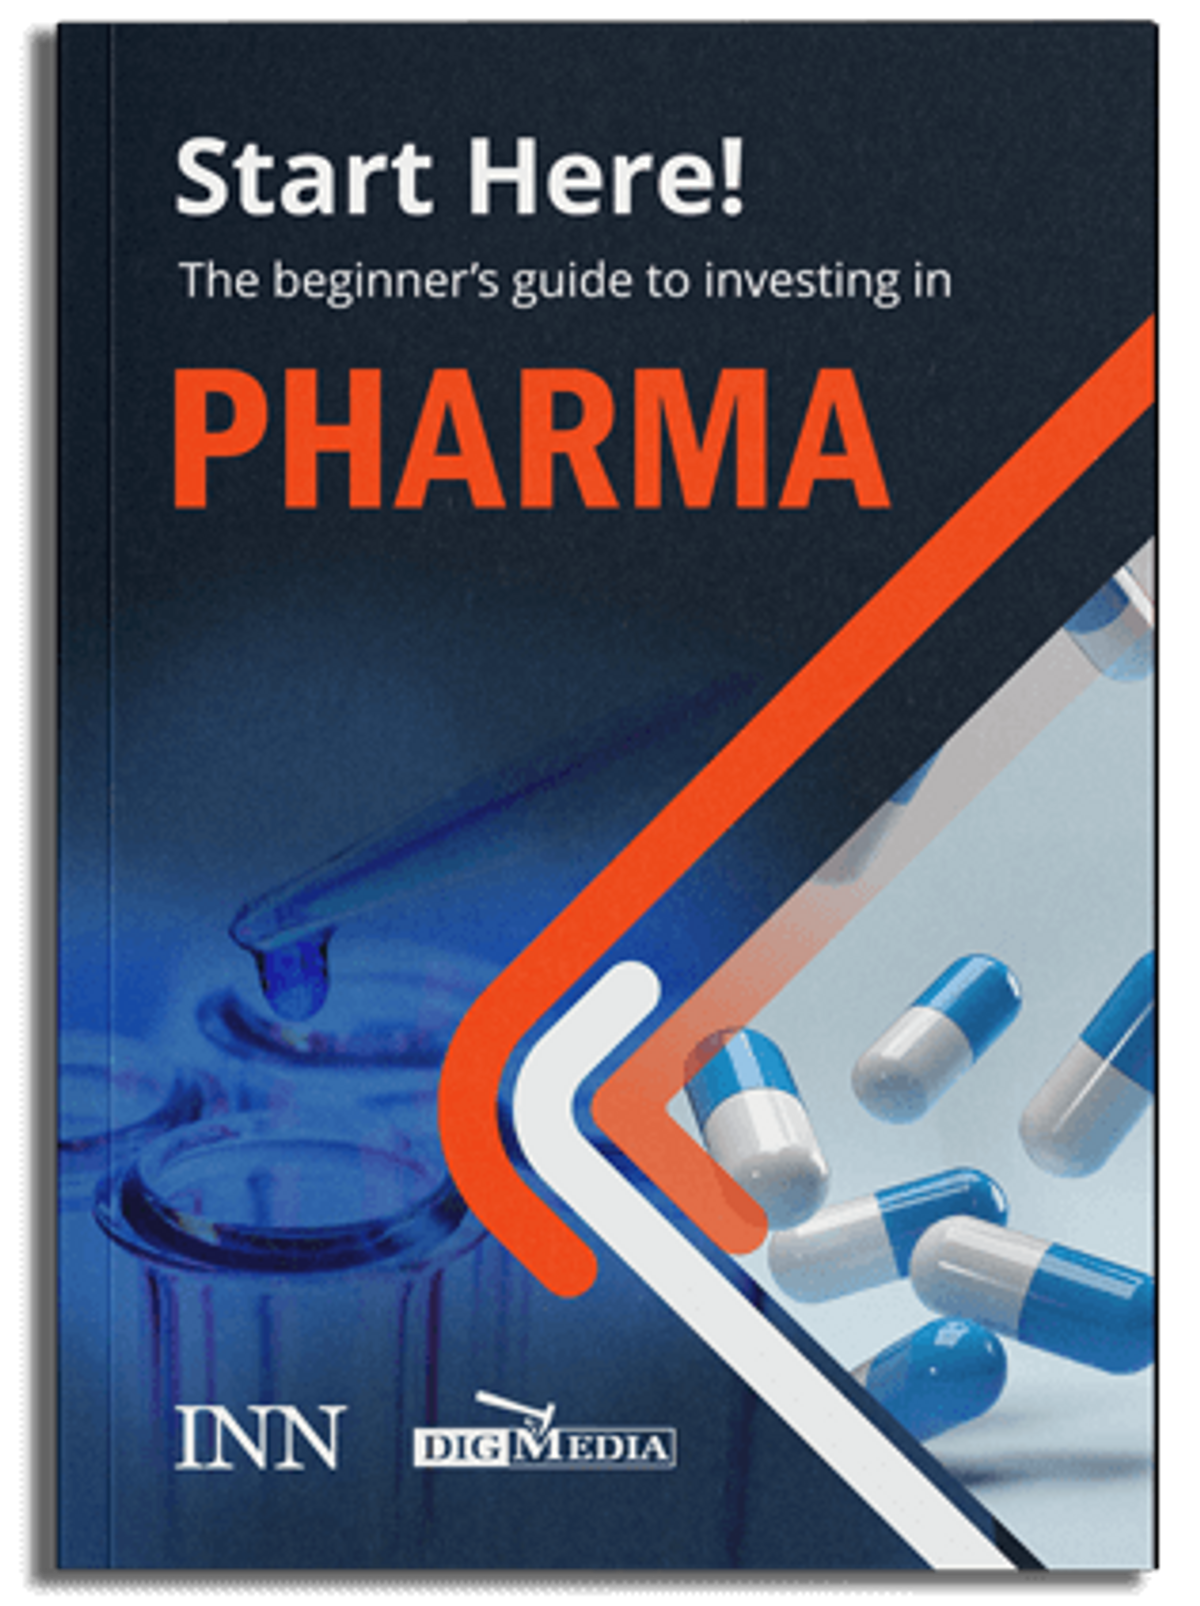  The Beginner's Guide to Investing In Pharma